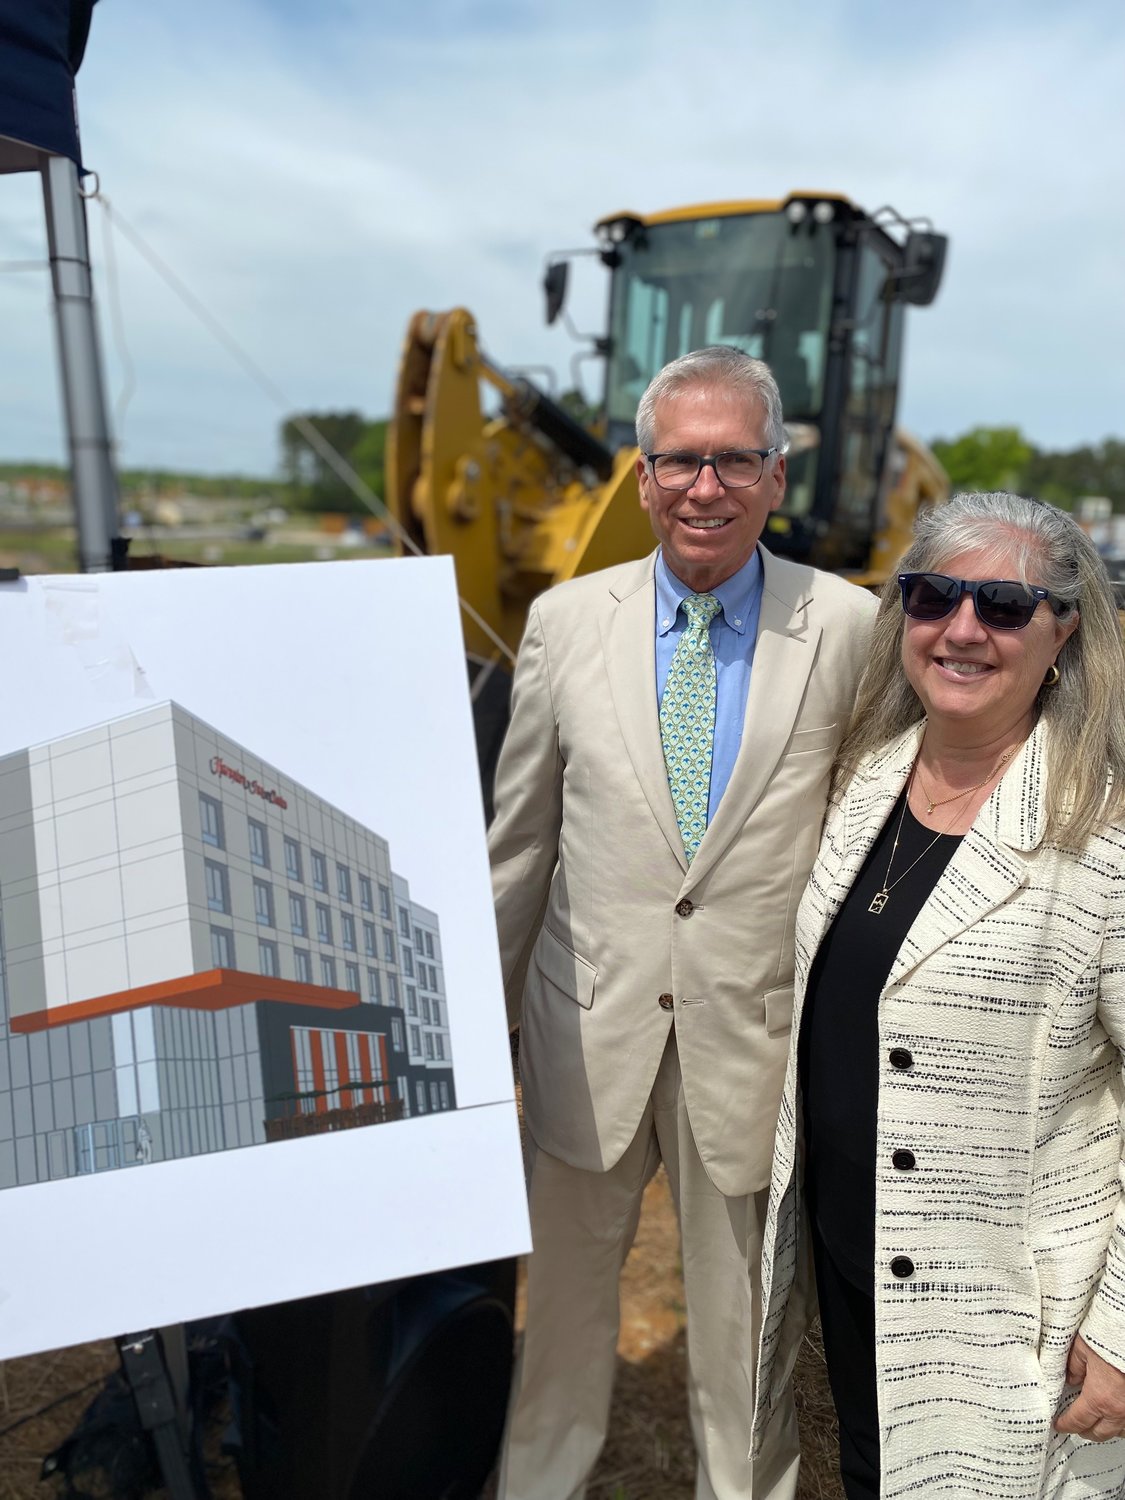 Malcolm and Sally Bryant, the co-founders of Malcolm Bryant Corporation, pose with a rendering of the 121-key Hampton Inn to be built within Mosaic at Chatham Park. Chatham County's first hotel will open its doors for guests in the fall of 2023.